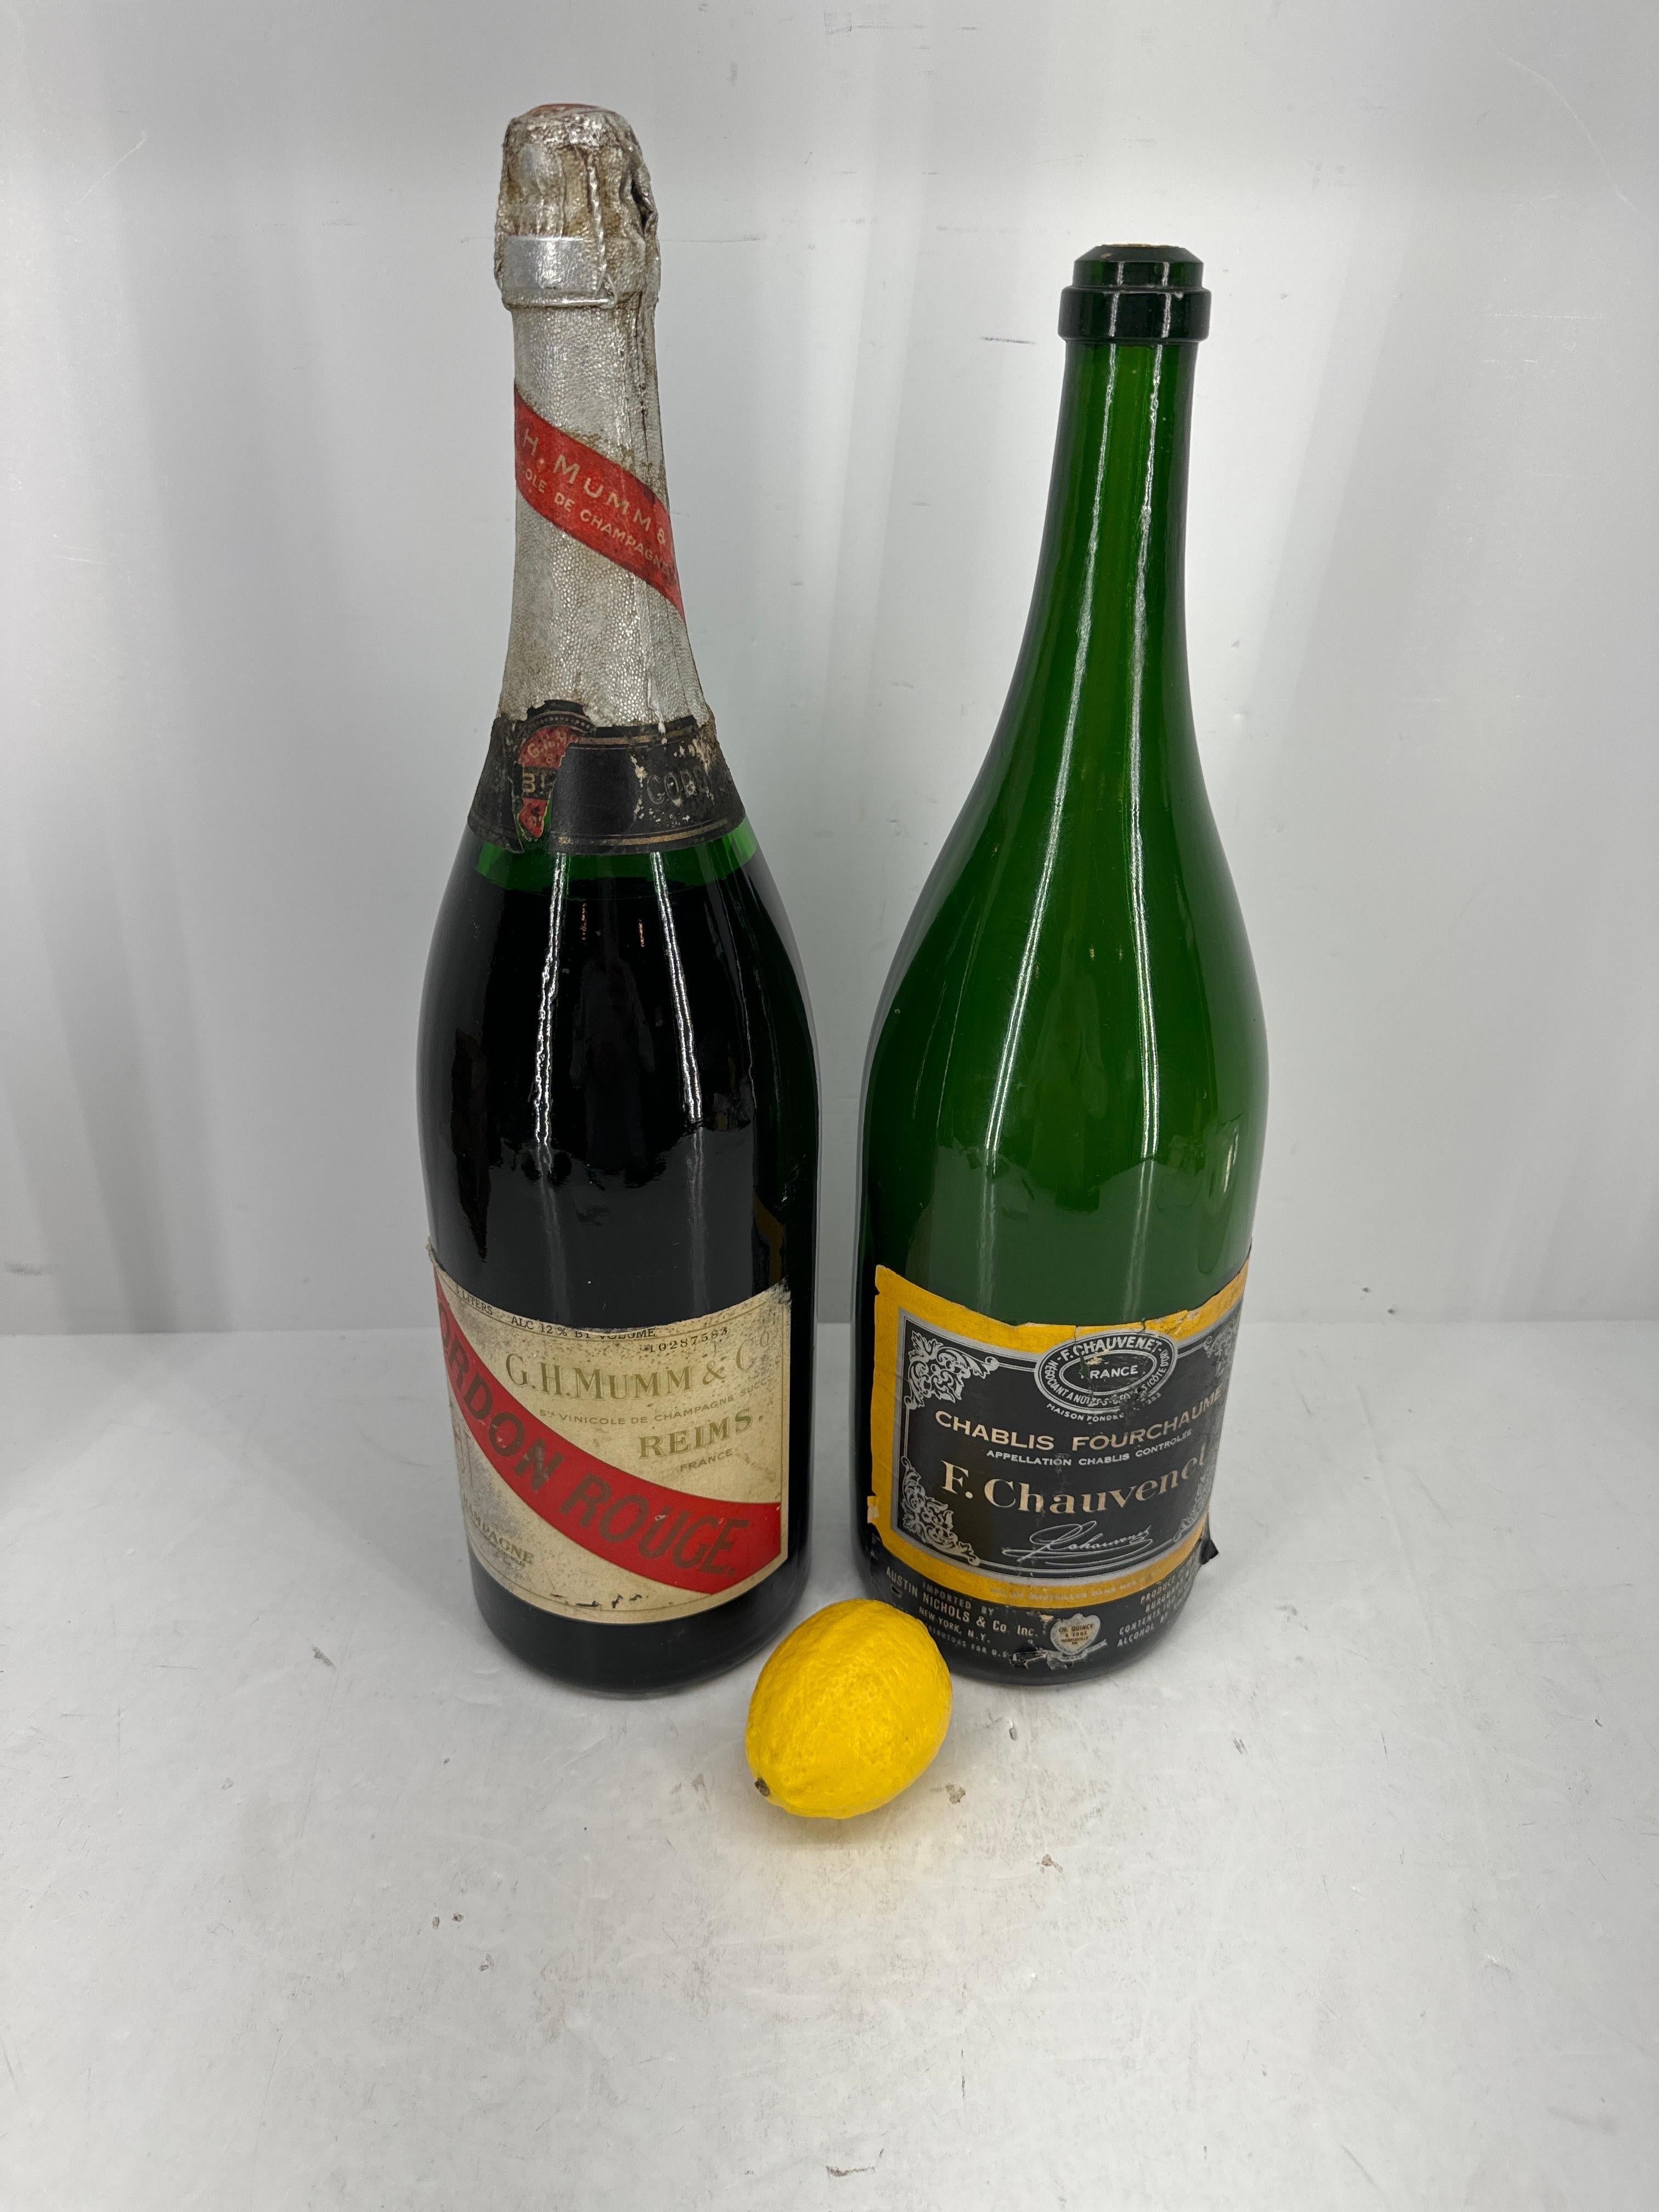 Two Oversized Bottles from Gordon Rouge GH Mumm and Co. and Francoise E. Chauvenet. These vintage bottles are perfect for display either in a home or on a bar in a store or restaurant setting. Please note one bottle is intact, never opened. 

 